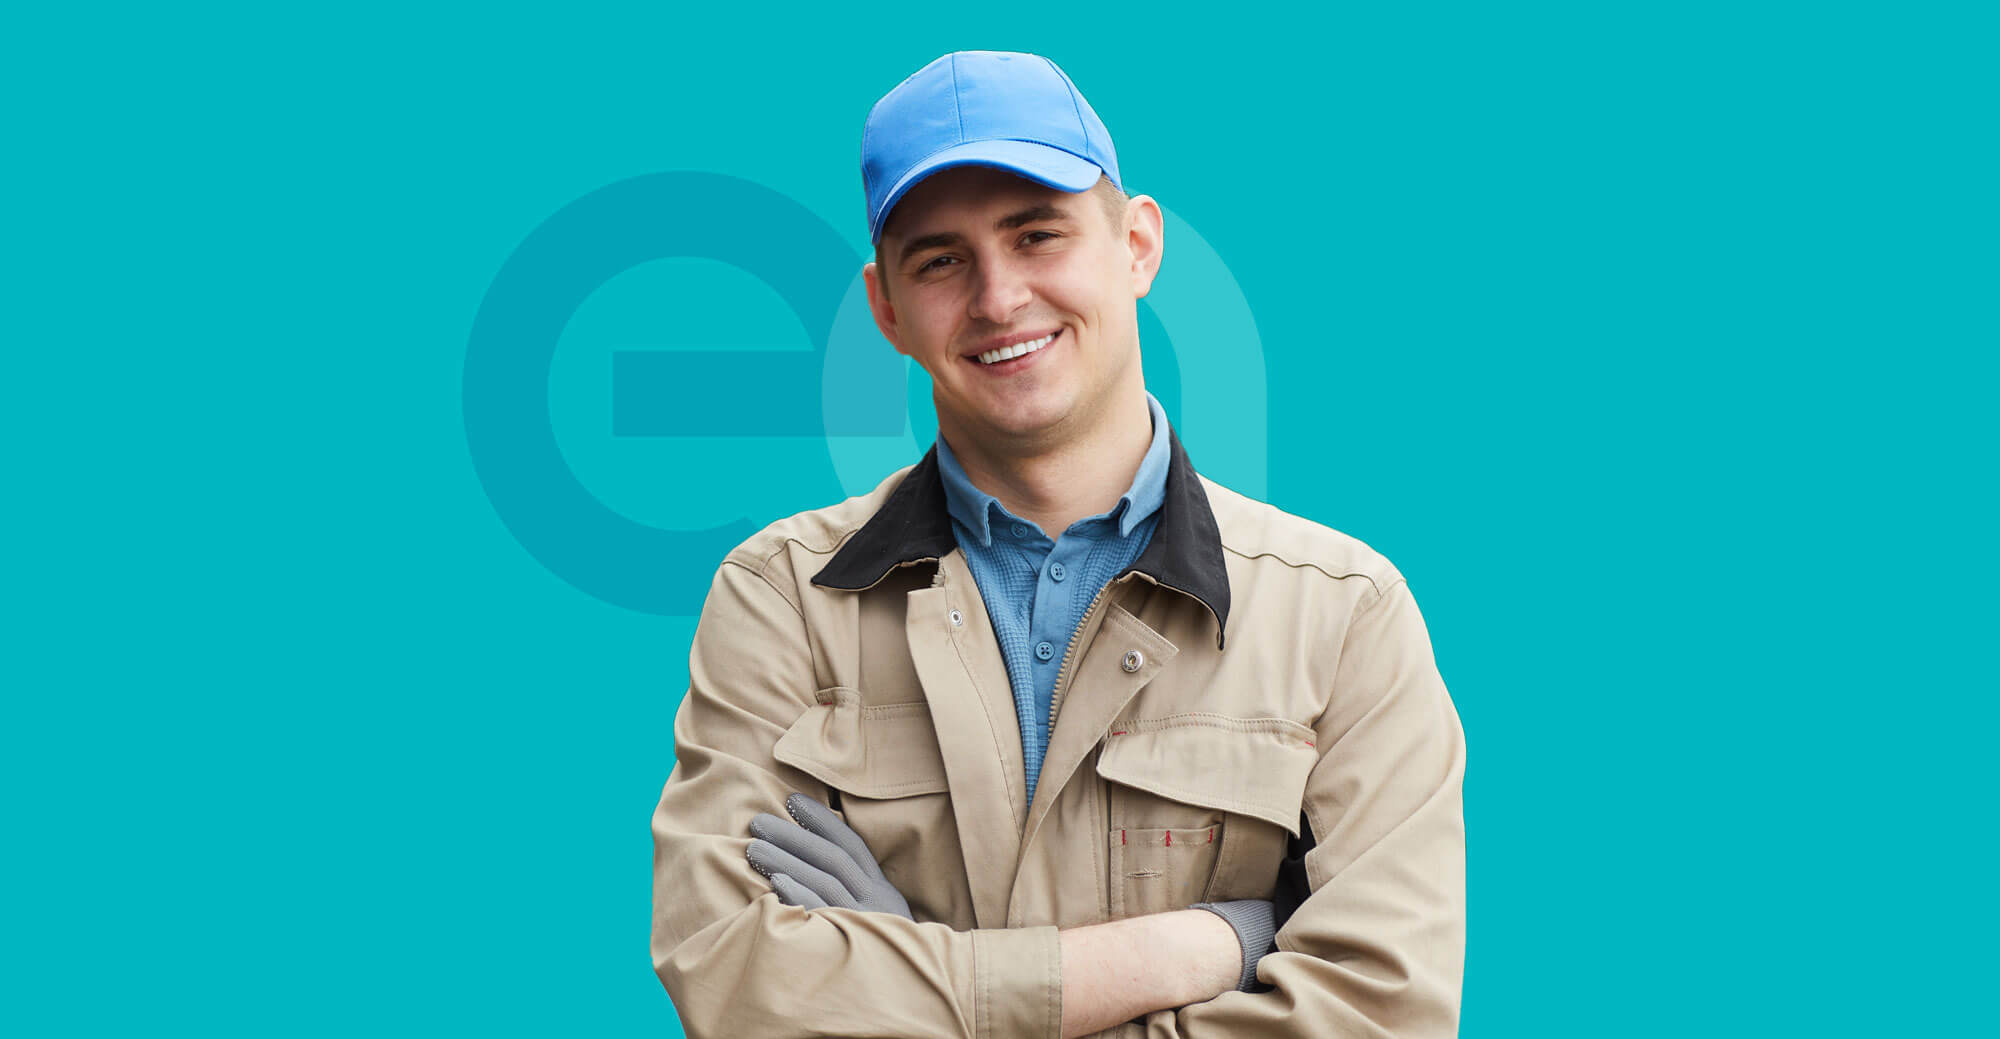 Delivery driver smiling with EA logo